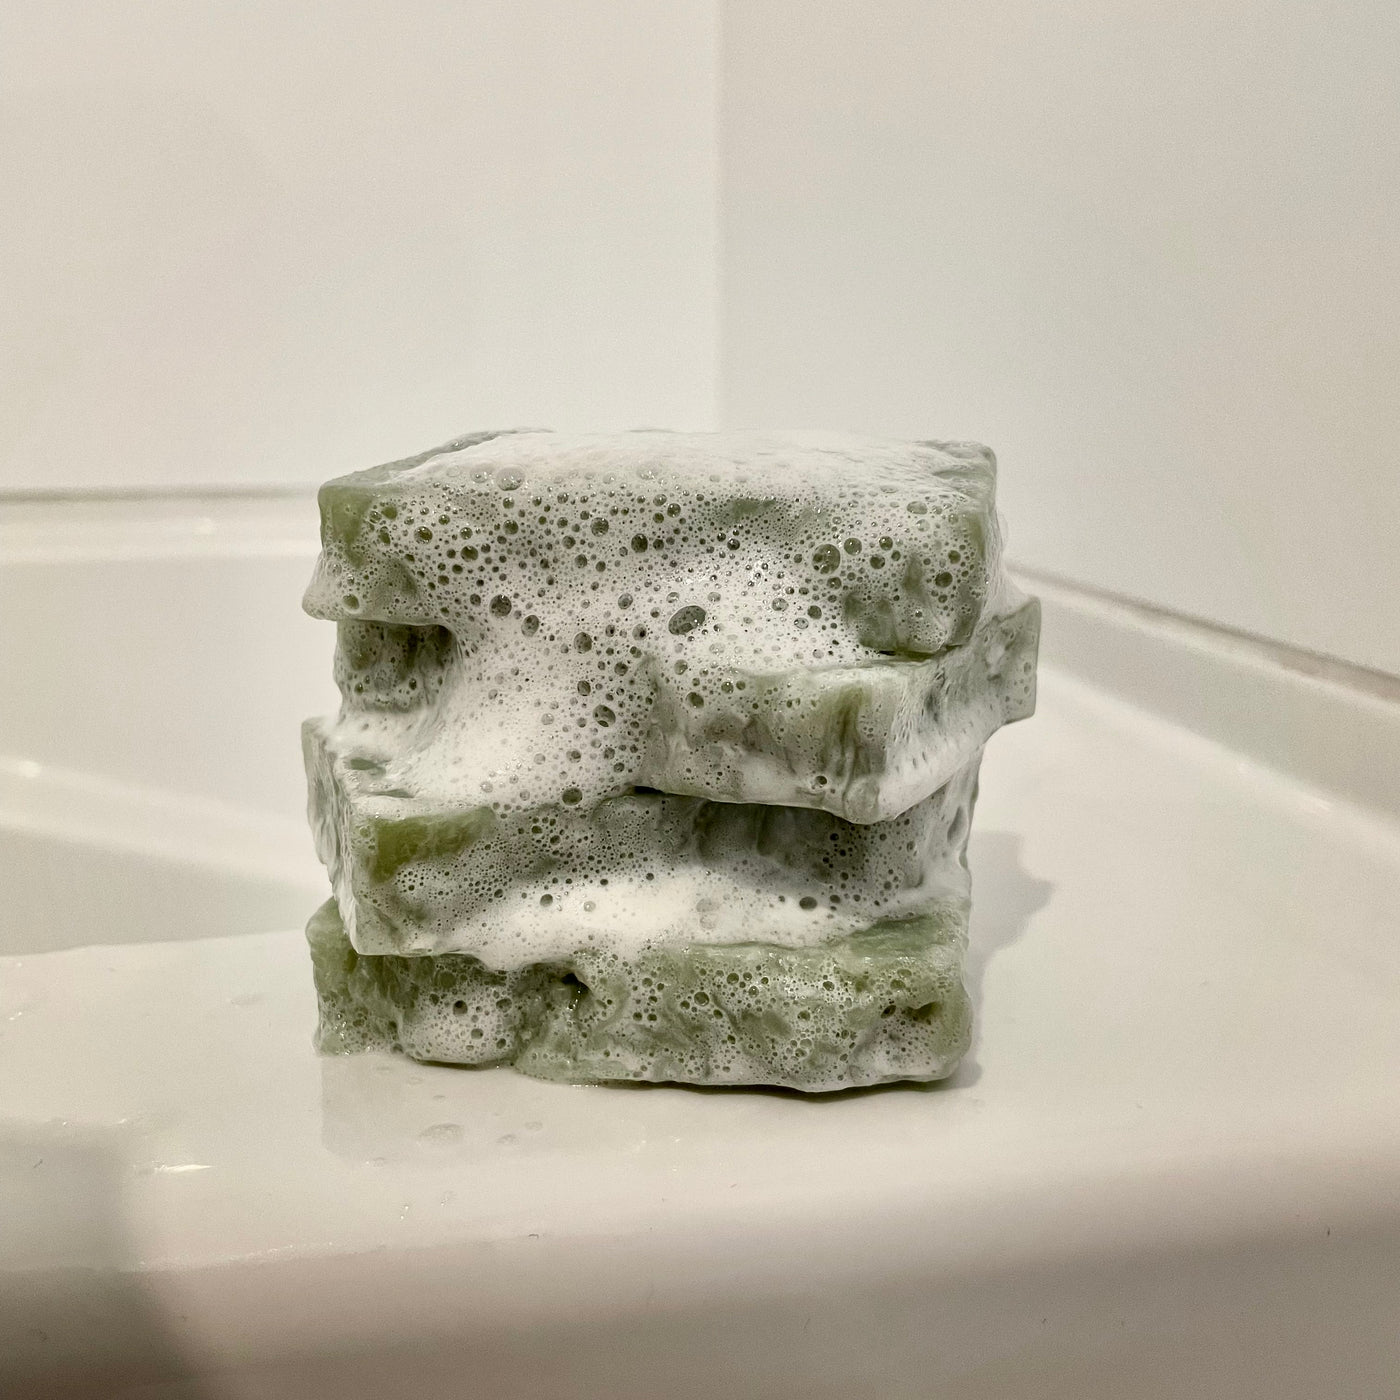 Why Kevin Loves Our Shampoo Bars?